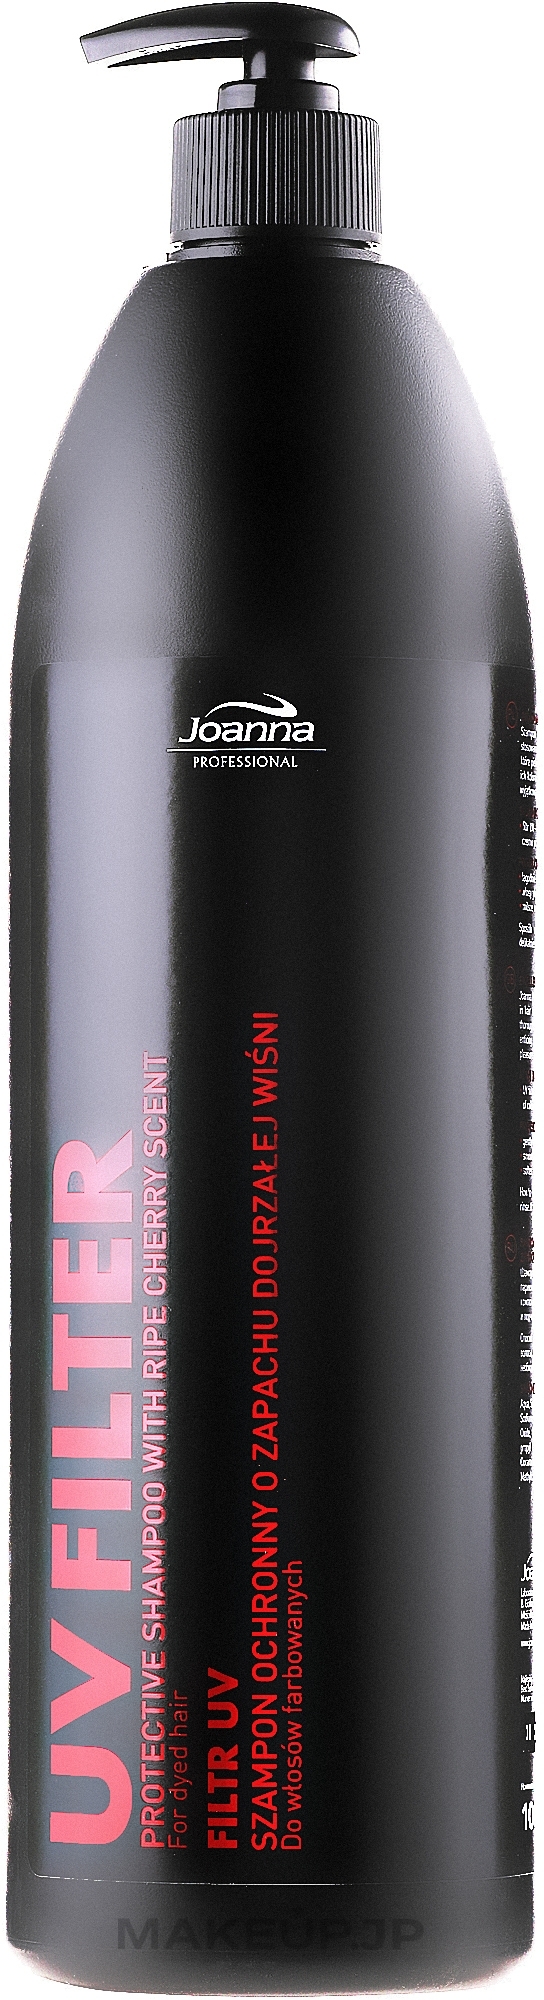 UV Filter Cherry Scent Shampoo for Colored Hair - Joanna Professional Hairdressing Shampoo — photo 1000 ml